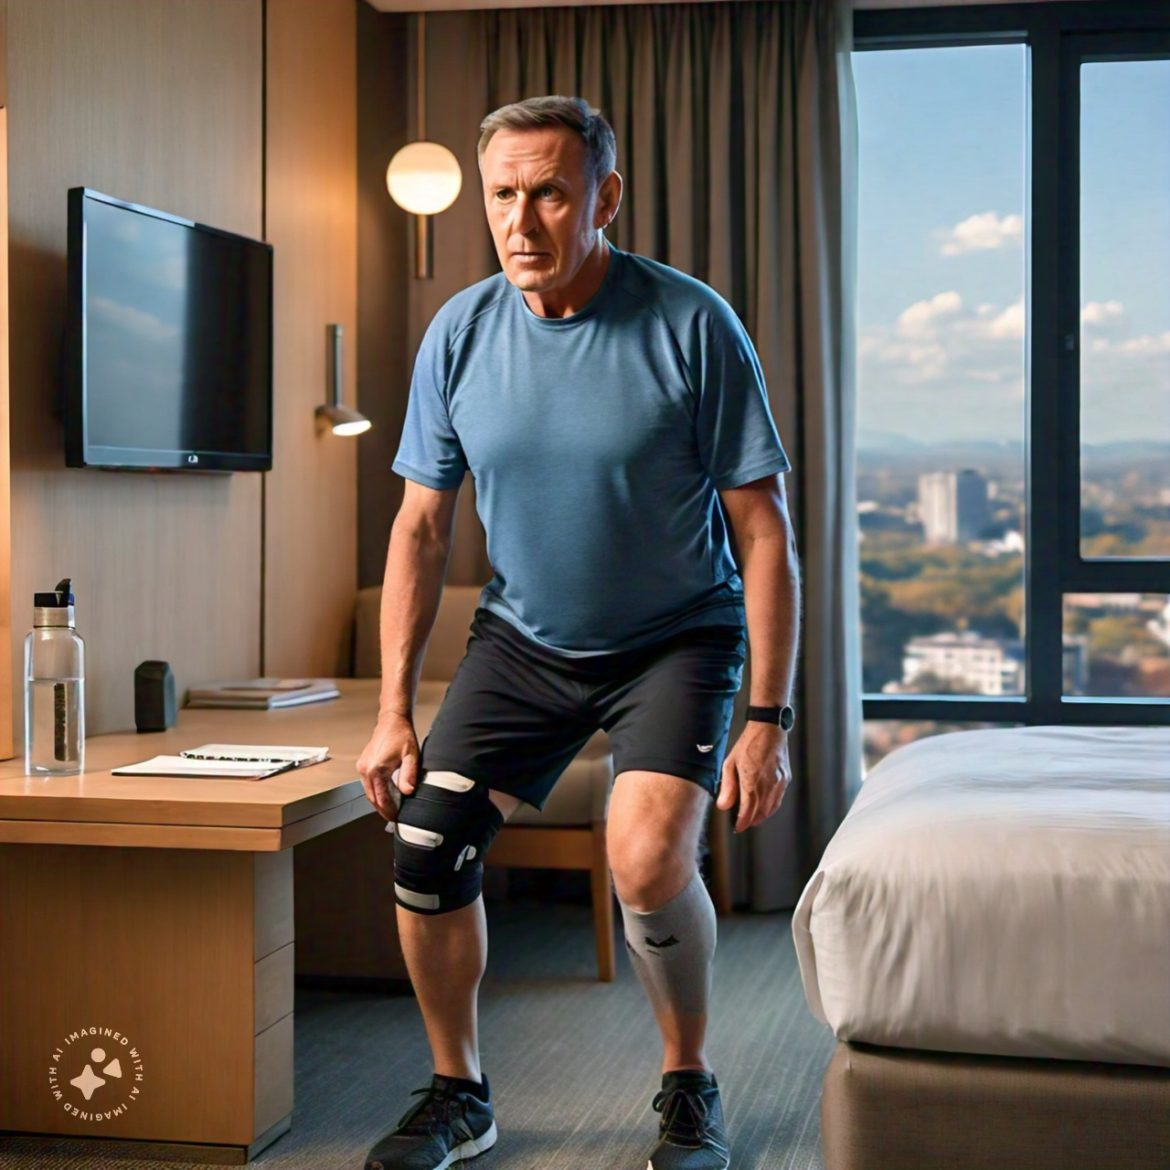 Effective Hotel Room Exercises for Enhanced Knee Recovery